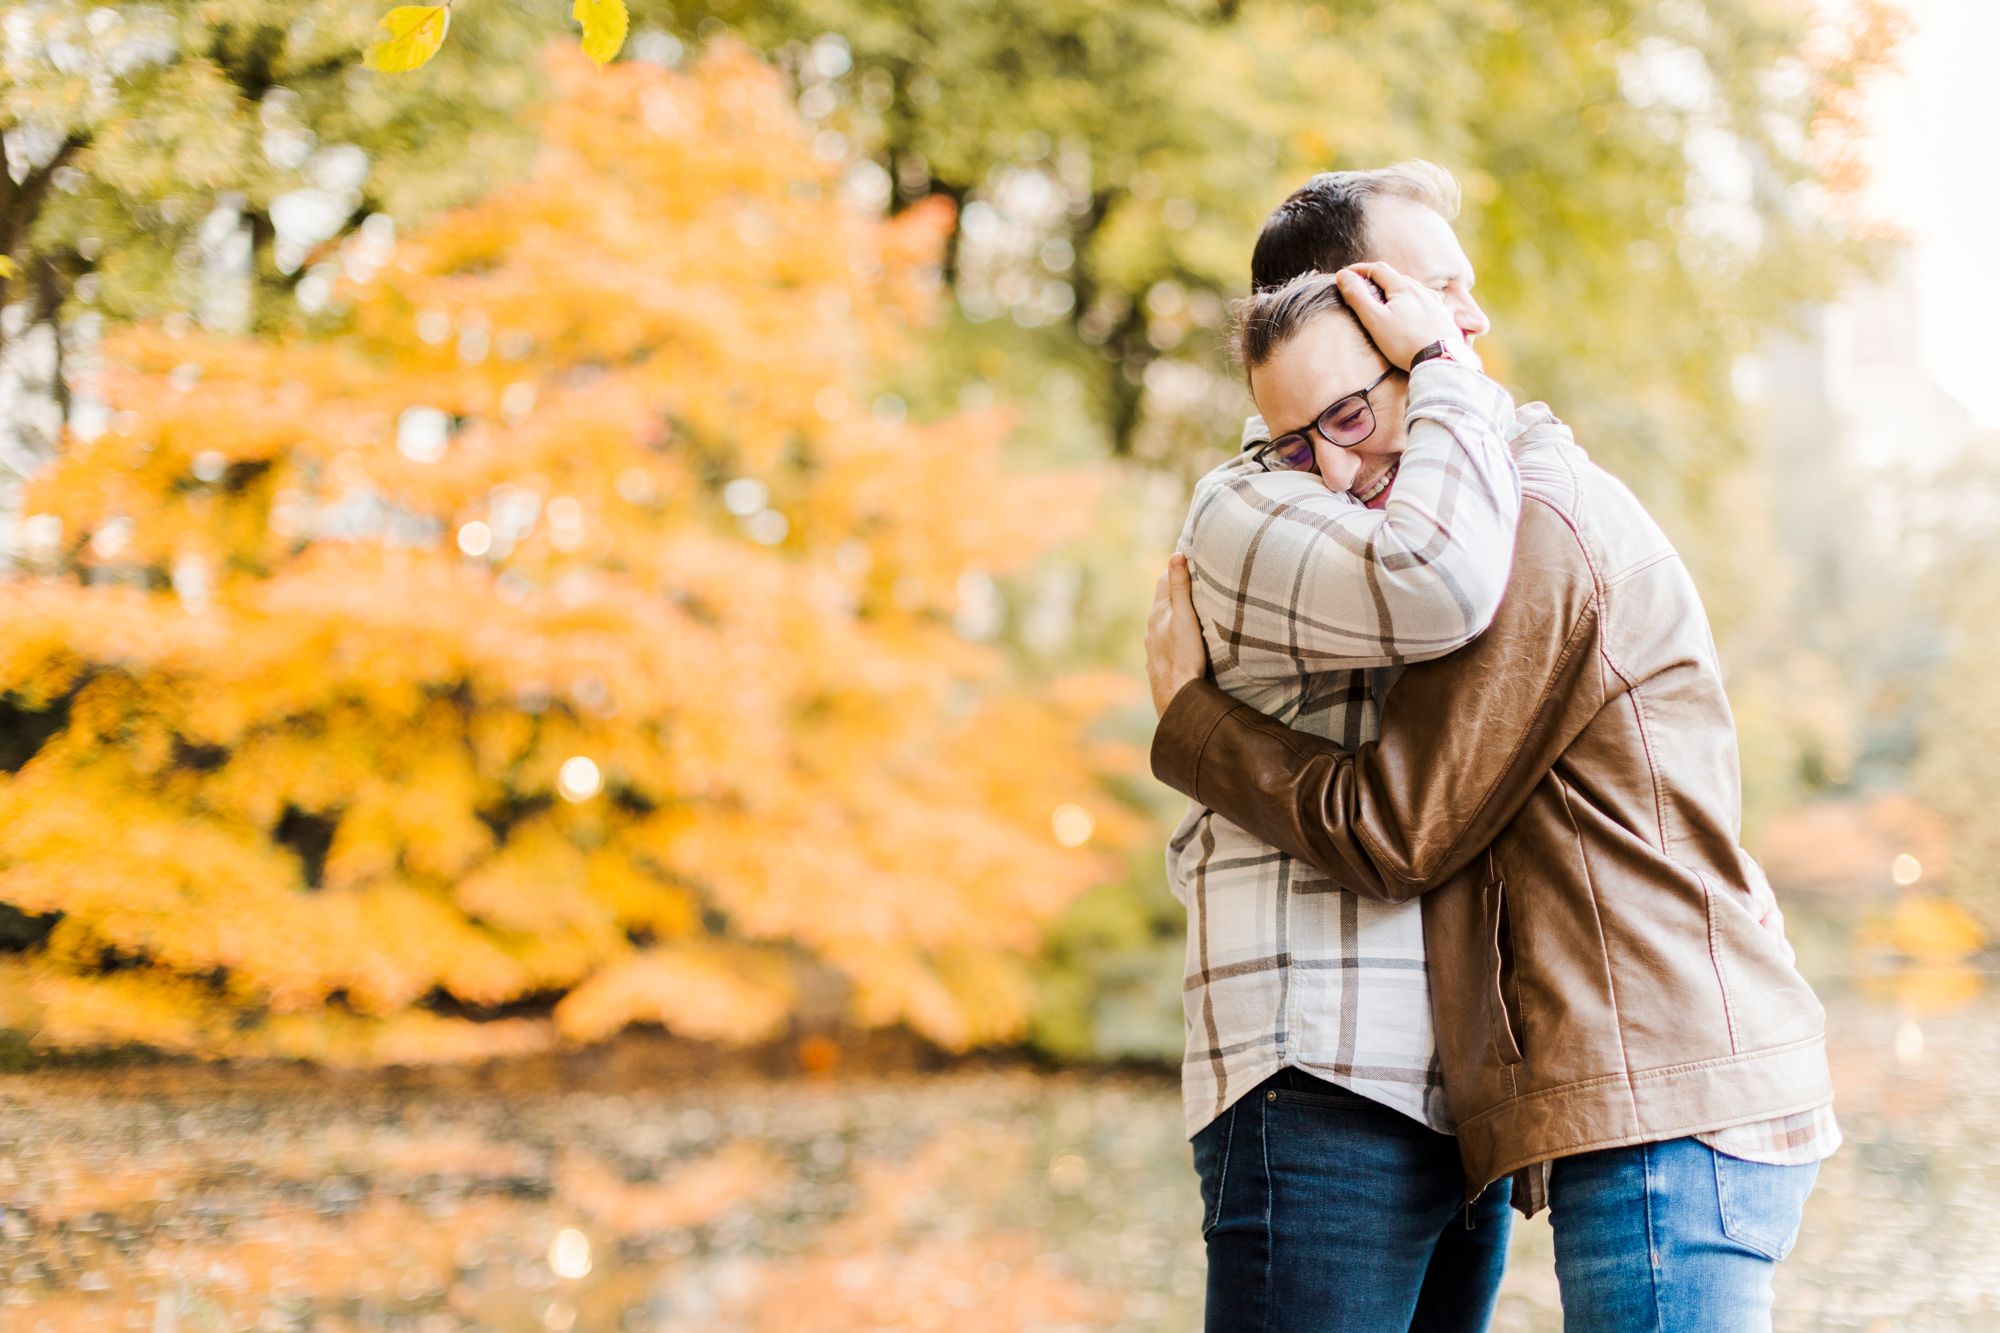 Classic Central Park Engagement Photo Shoot in Fall